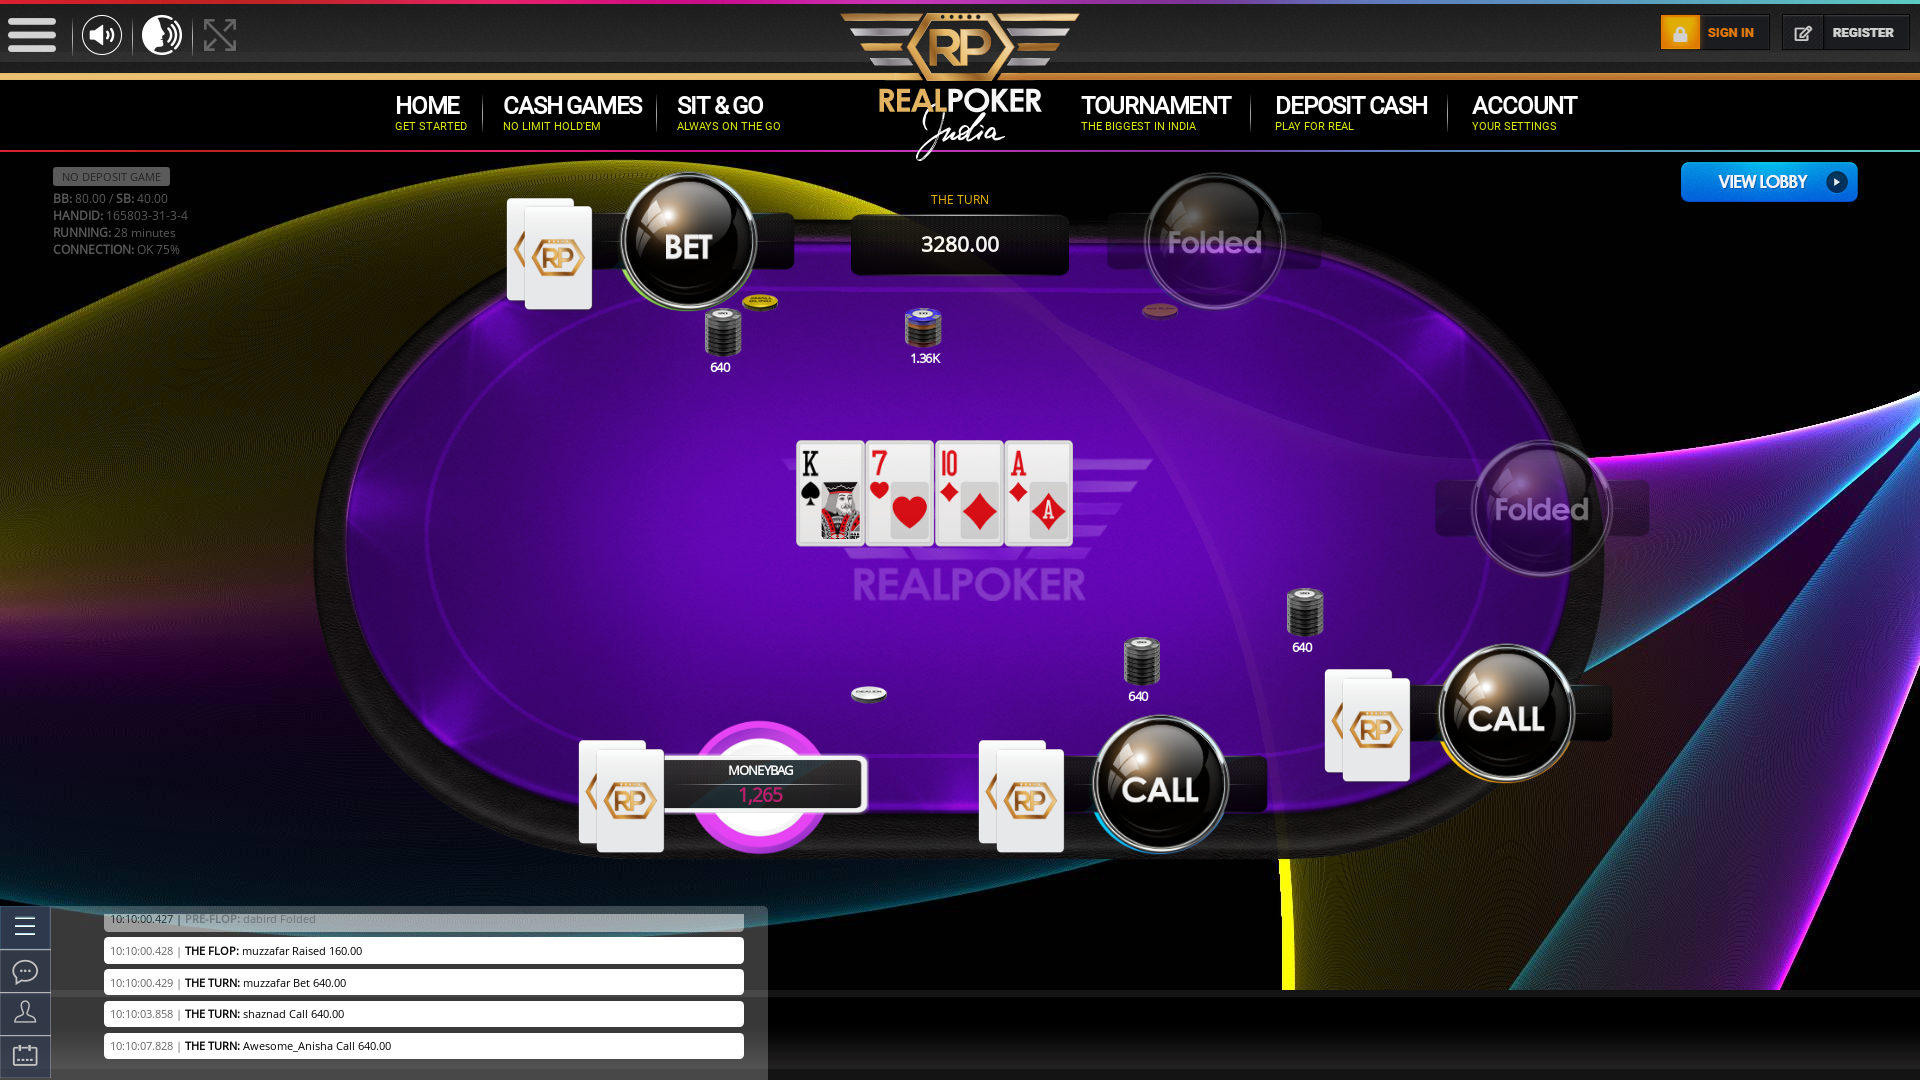 Indian online poker on a 10 player table in the 28th minute match up